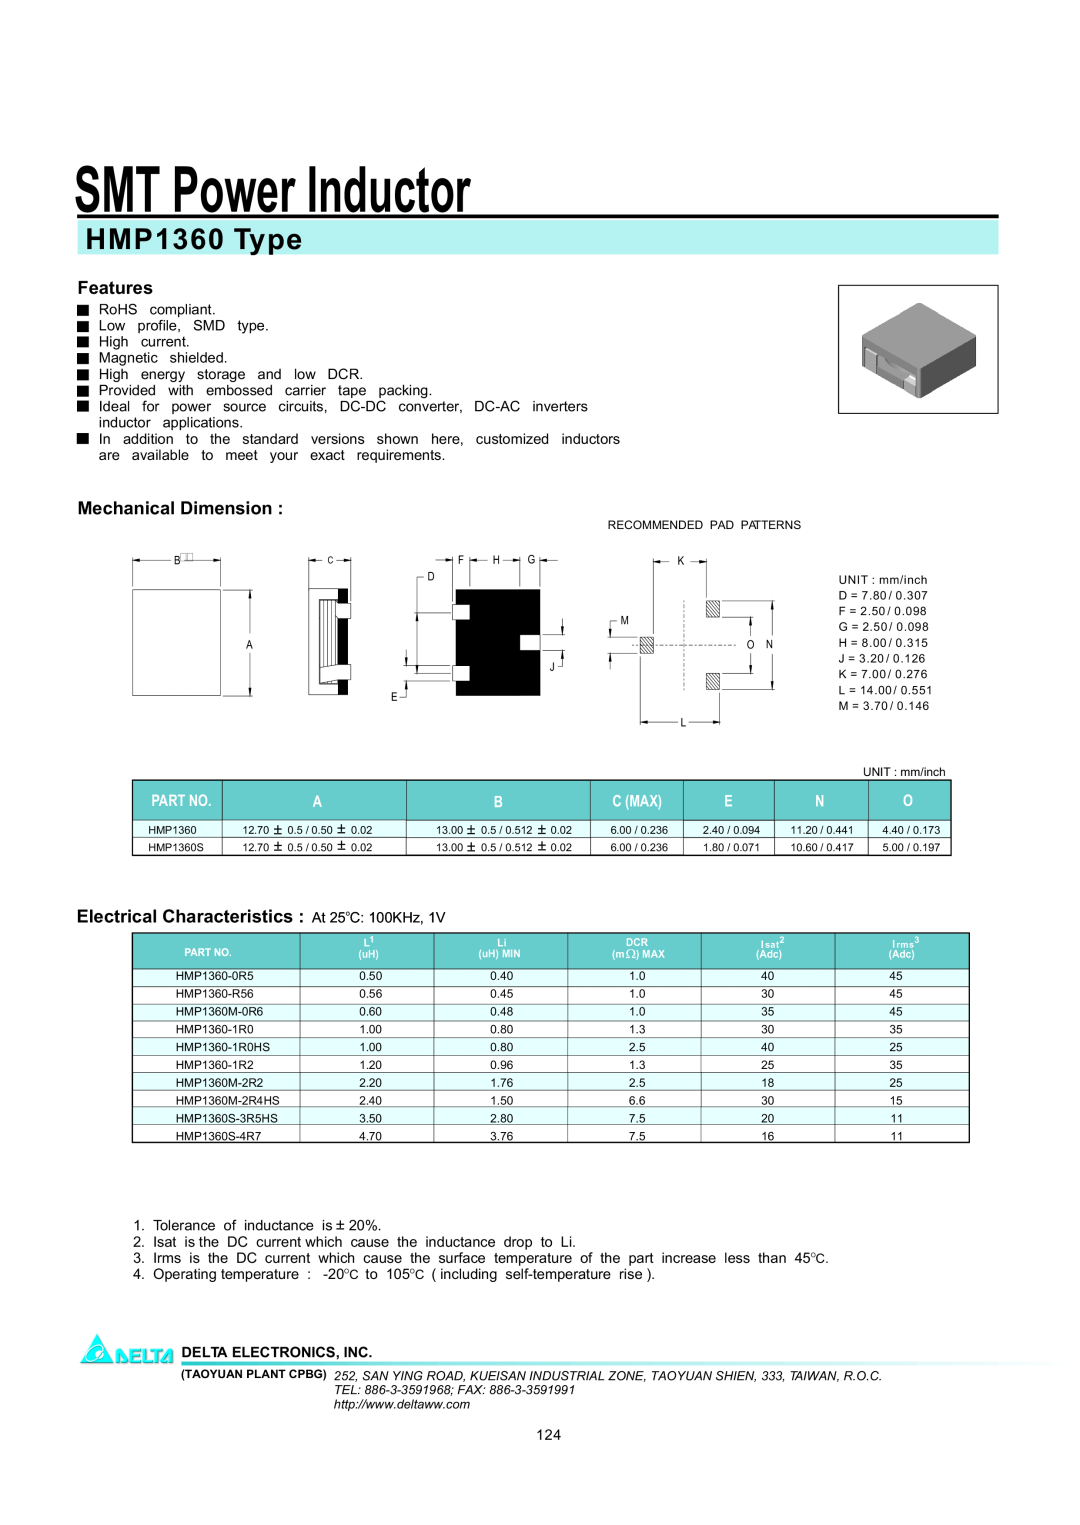 Delta Electronics manual SMT Power Inductor, HMP1360 Type, Features, Mechanical Dimension, C Max 